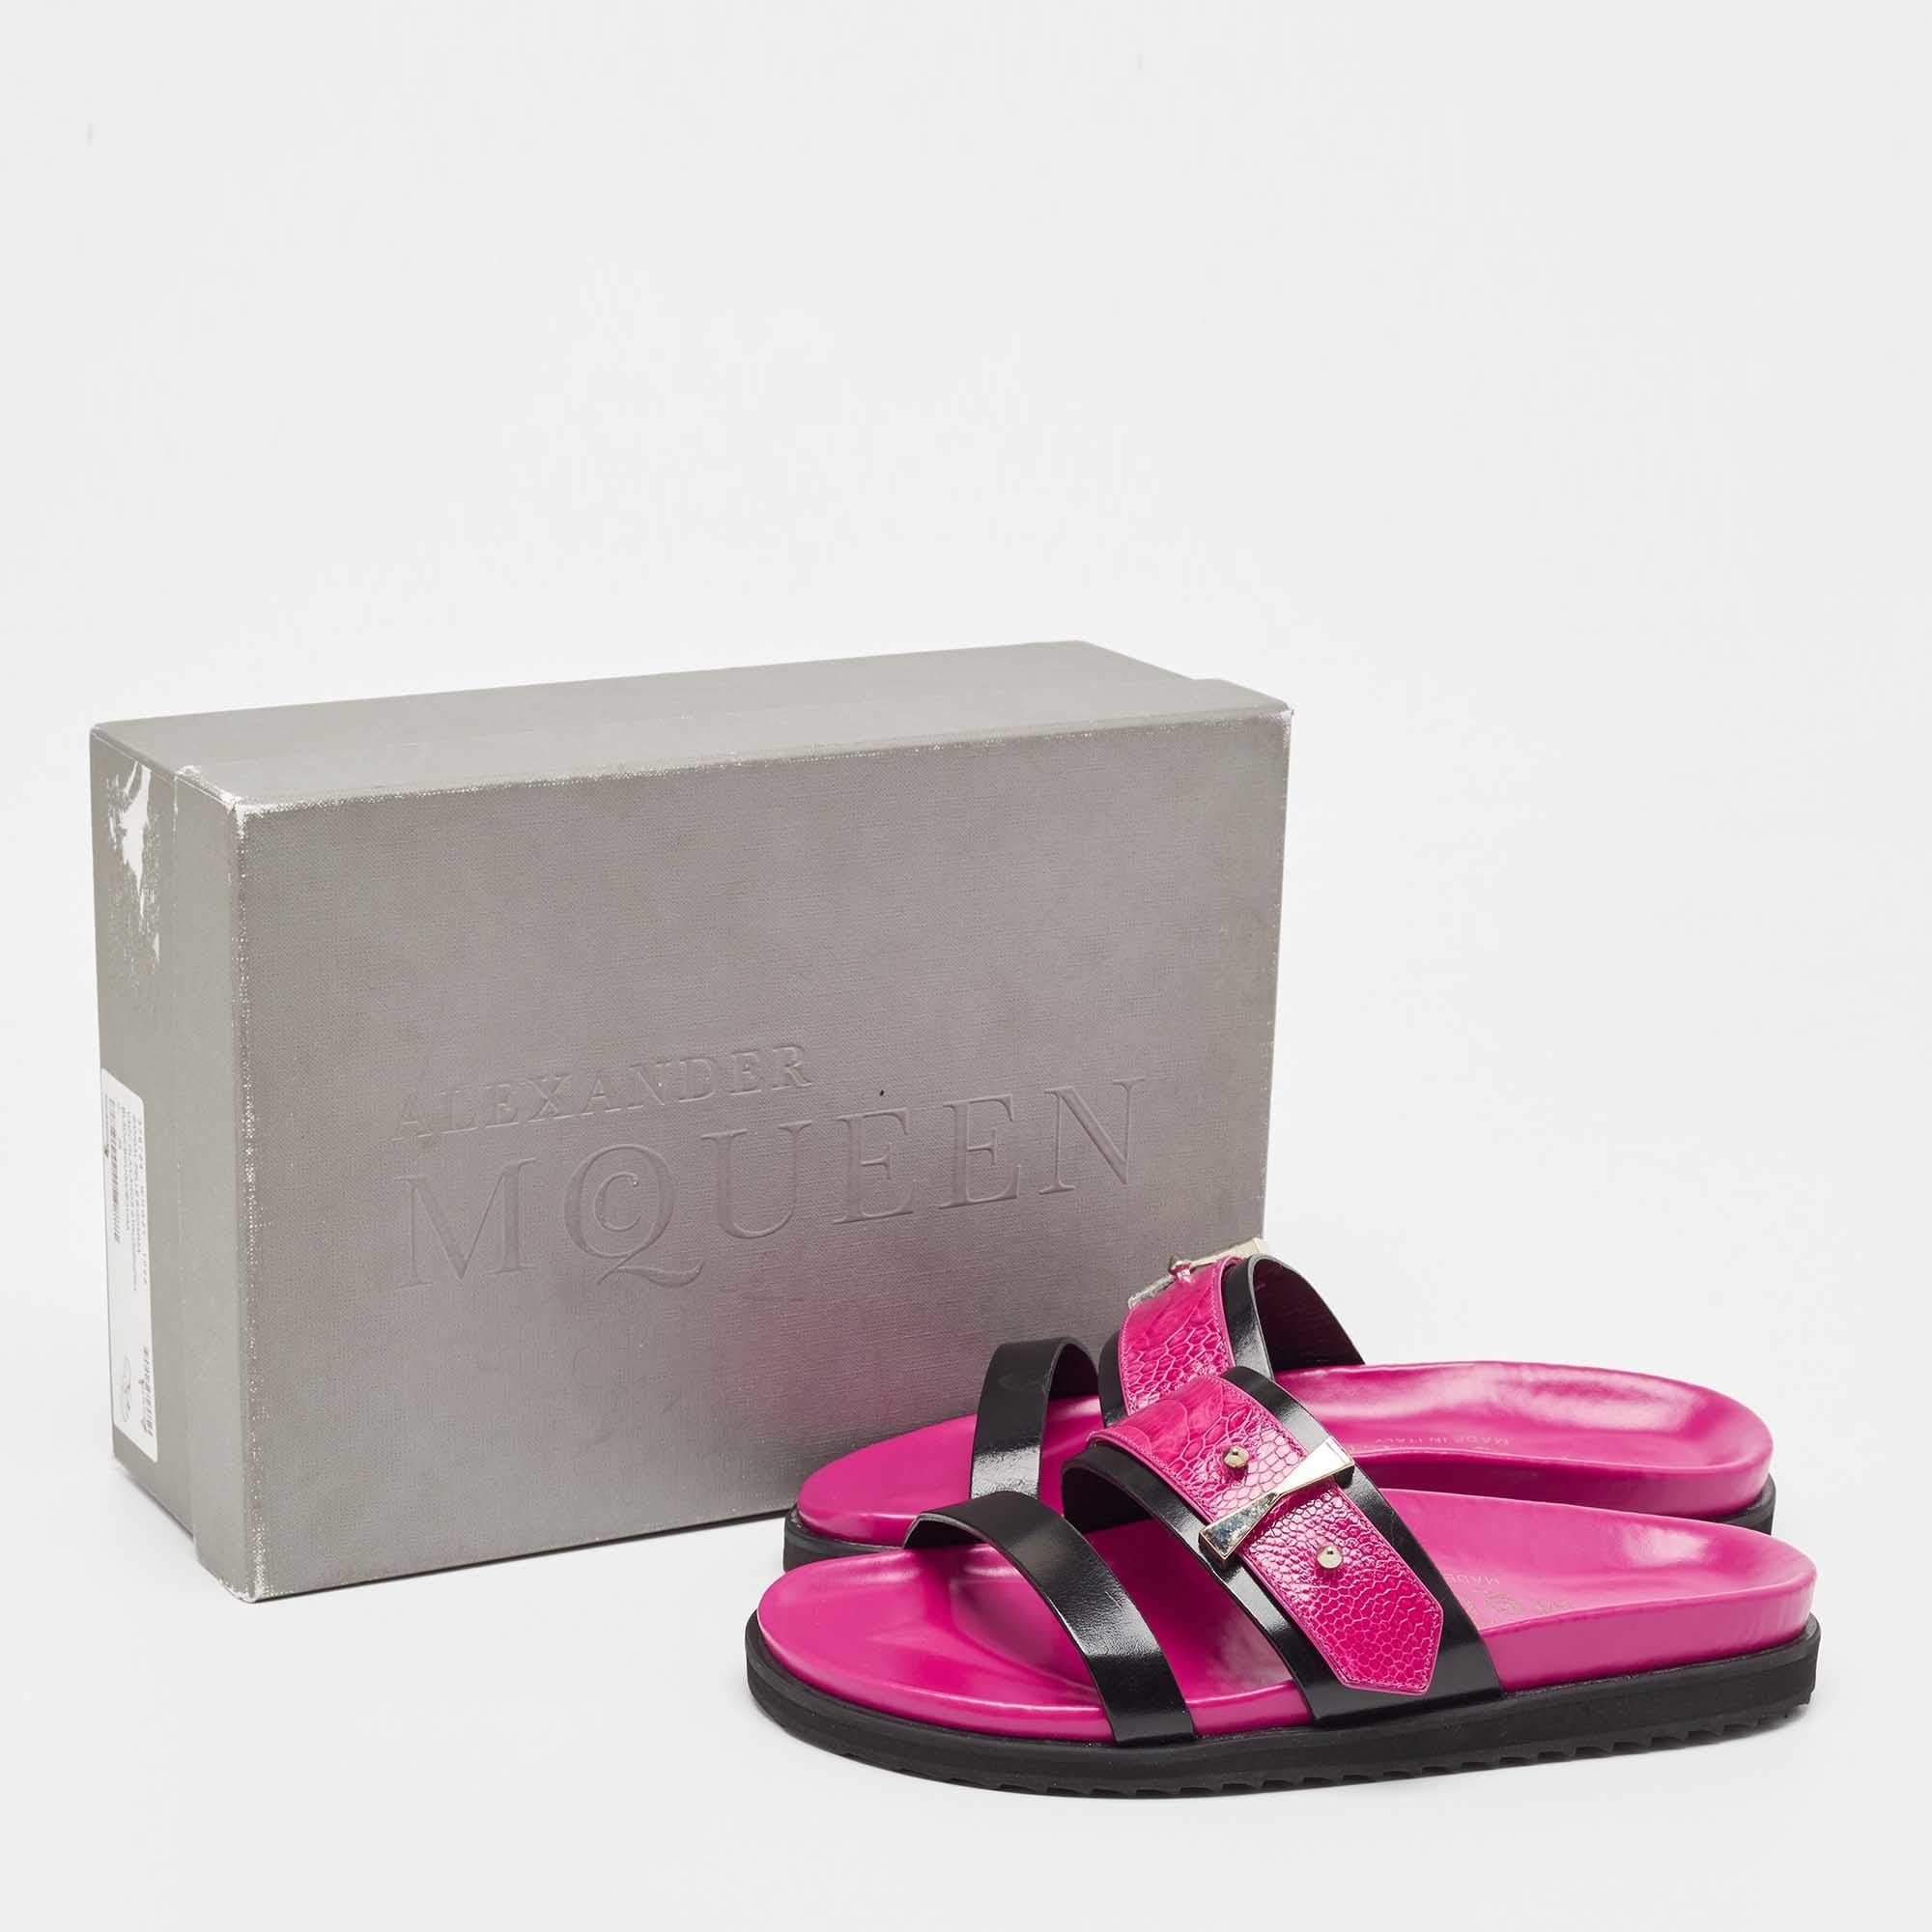 Alexander McQueen Pink/Black Ostrich Embossed and Leather Flat Sandals Size 38 5